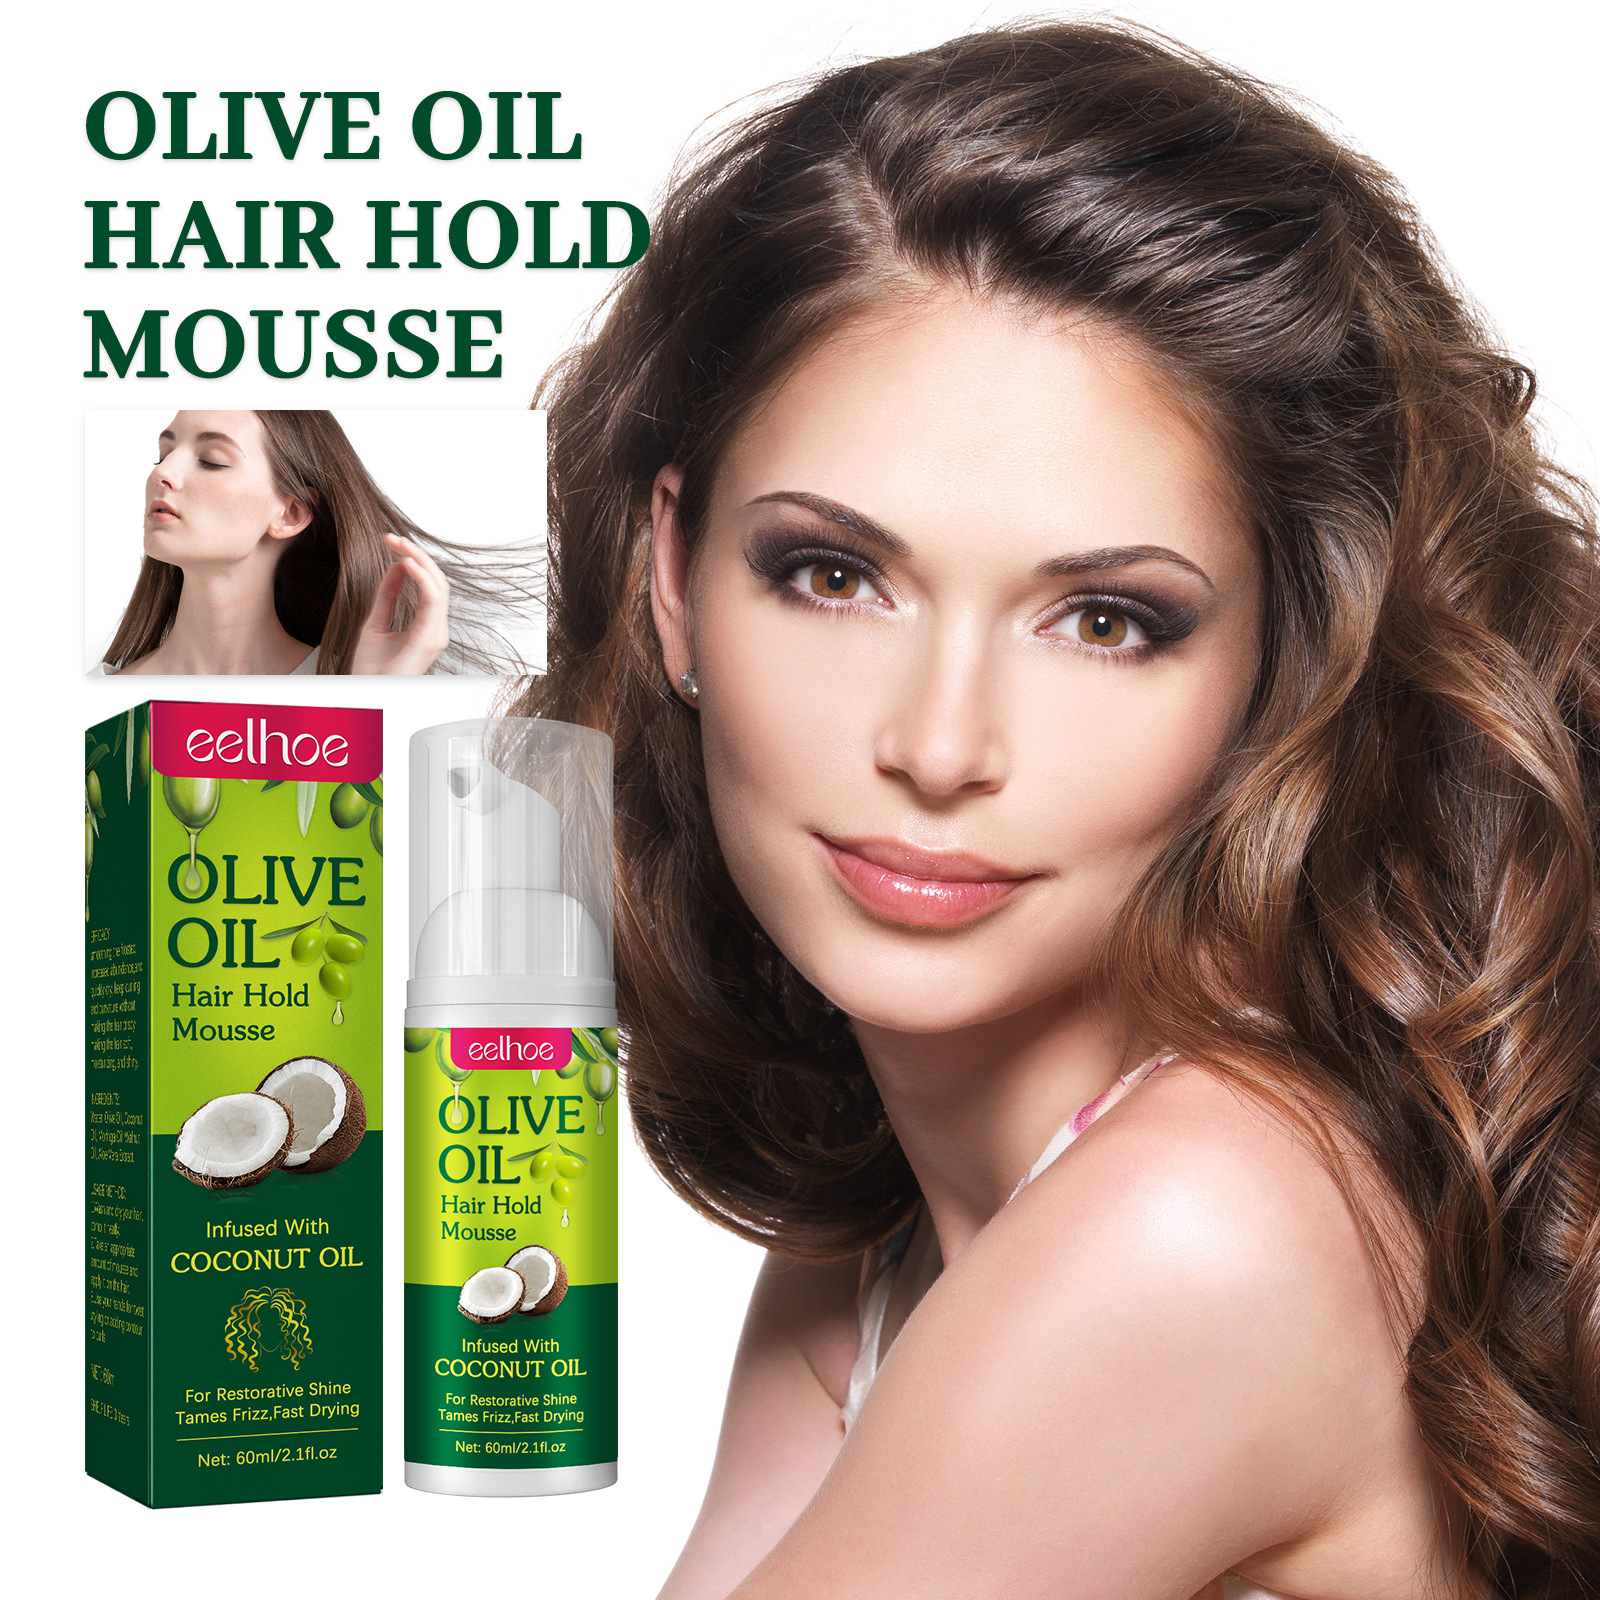 Eelhoe Olive Oil Hair Styling Mousse